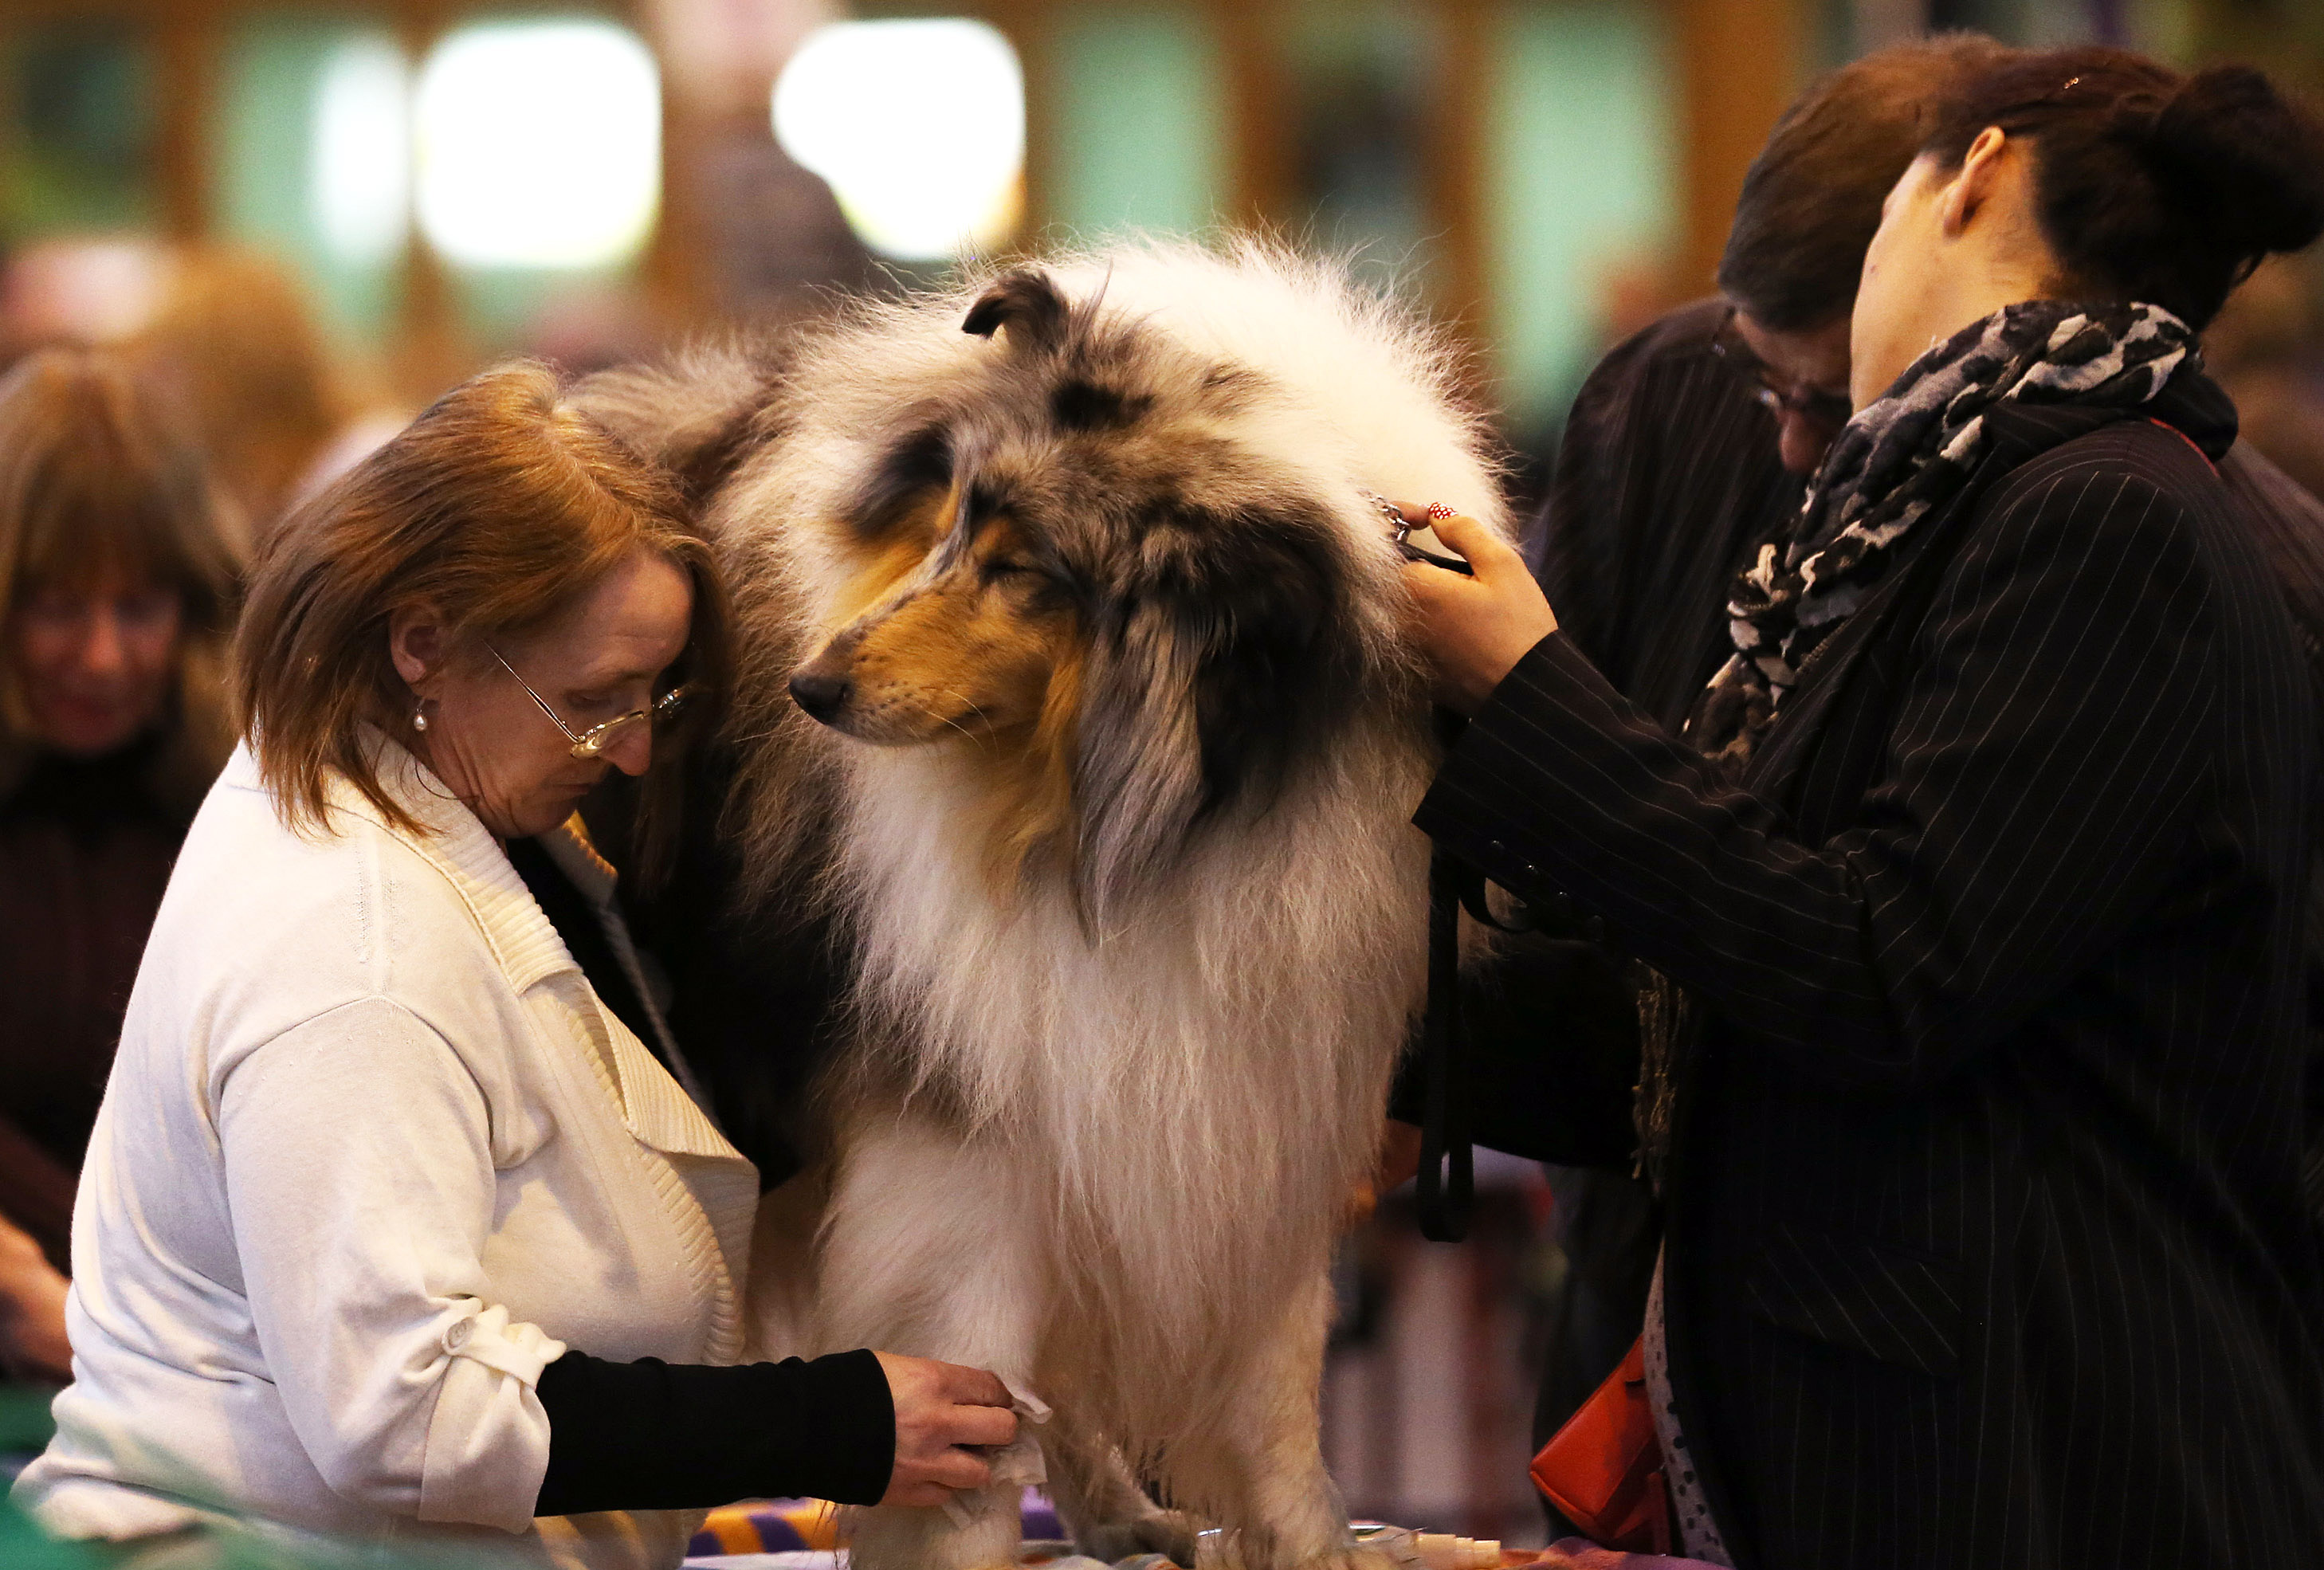 BIRMINGHAM, ENGLAND - MARCH 06:A dog is groomed on the first day of Crufts dog show at the NEC on March 6, 2014 in Birmingham, England. Said to be the largest show of its kind in the world, t